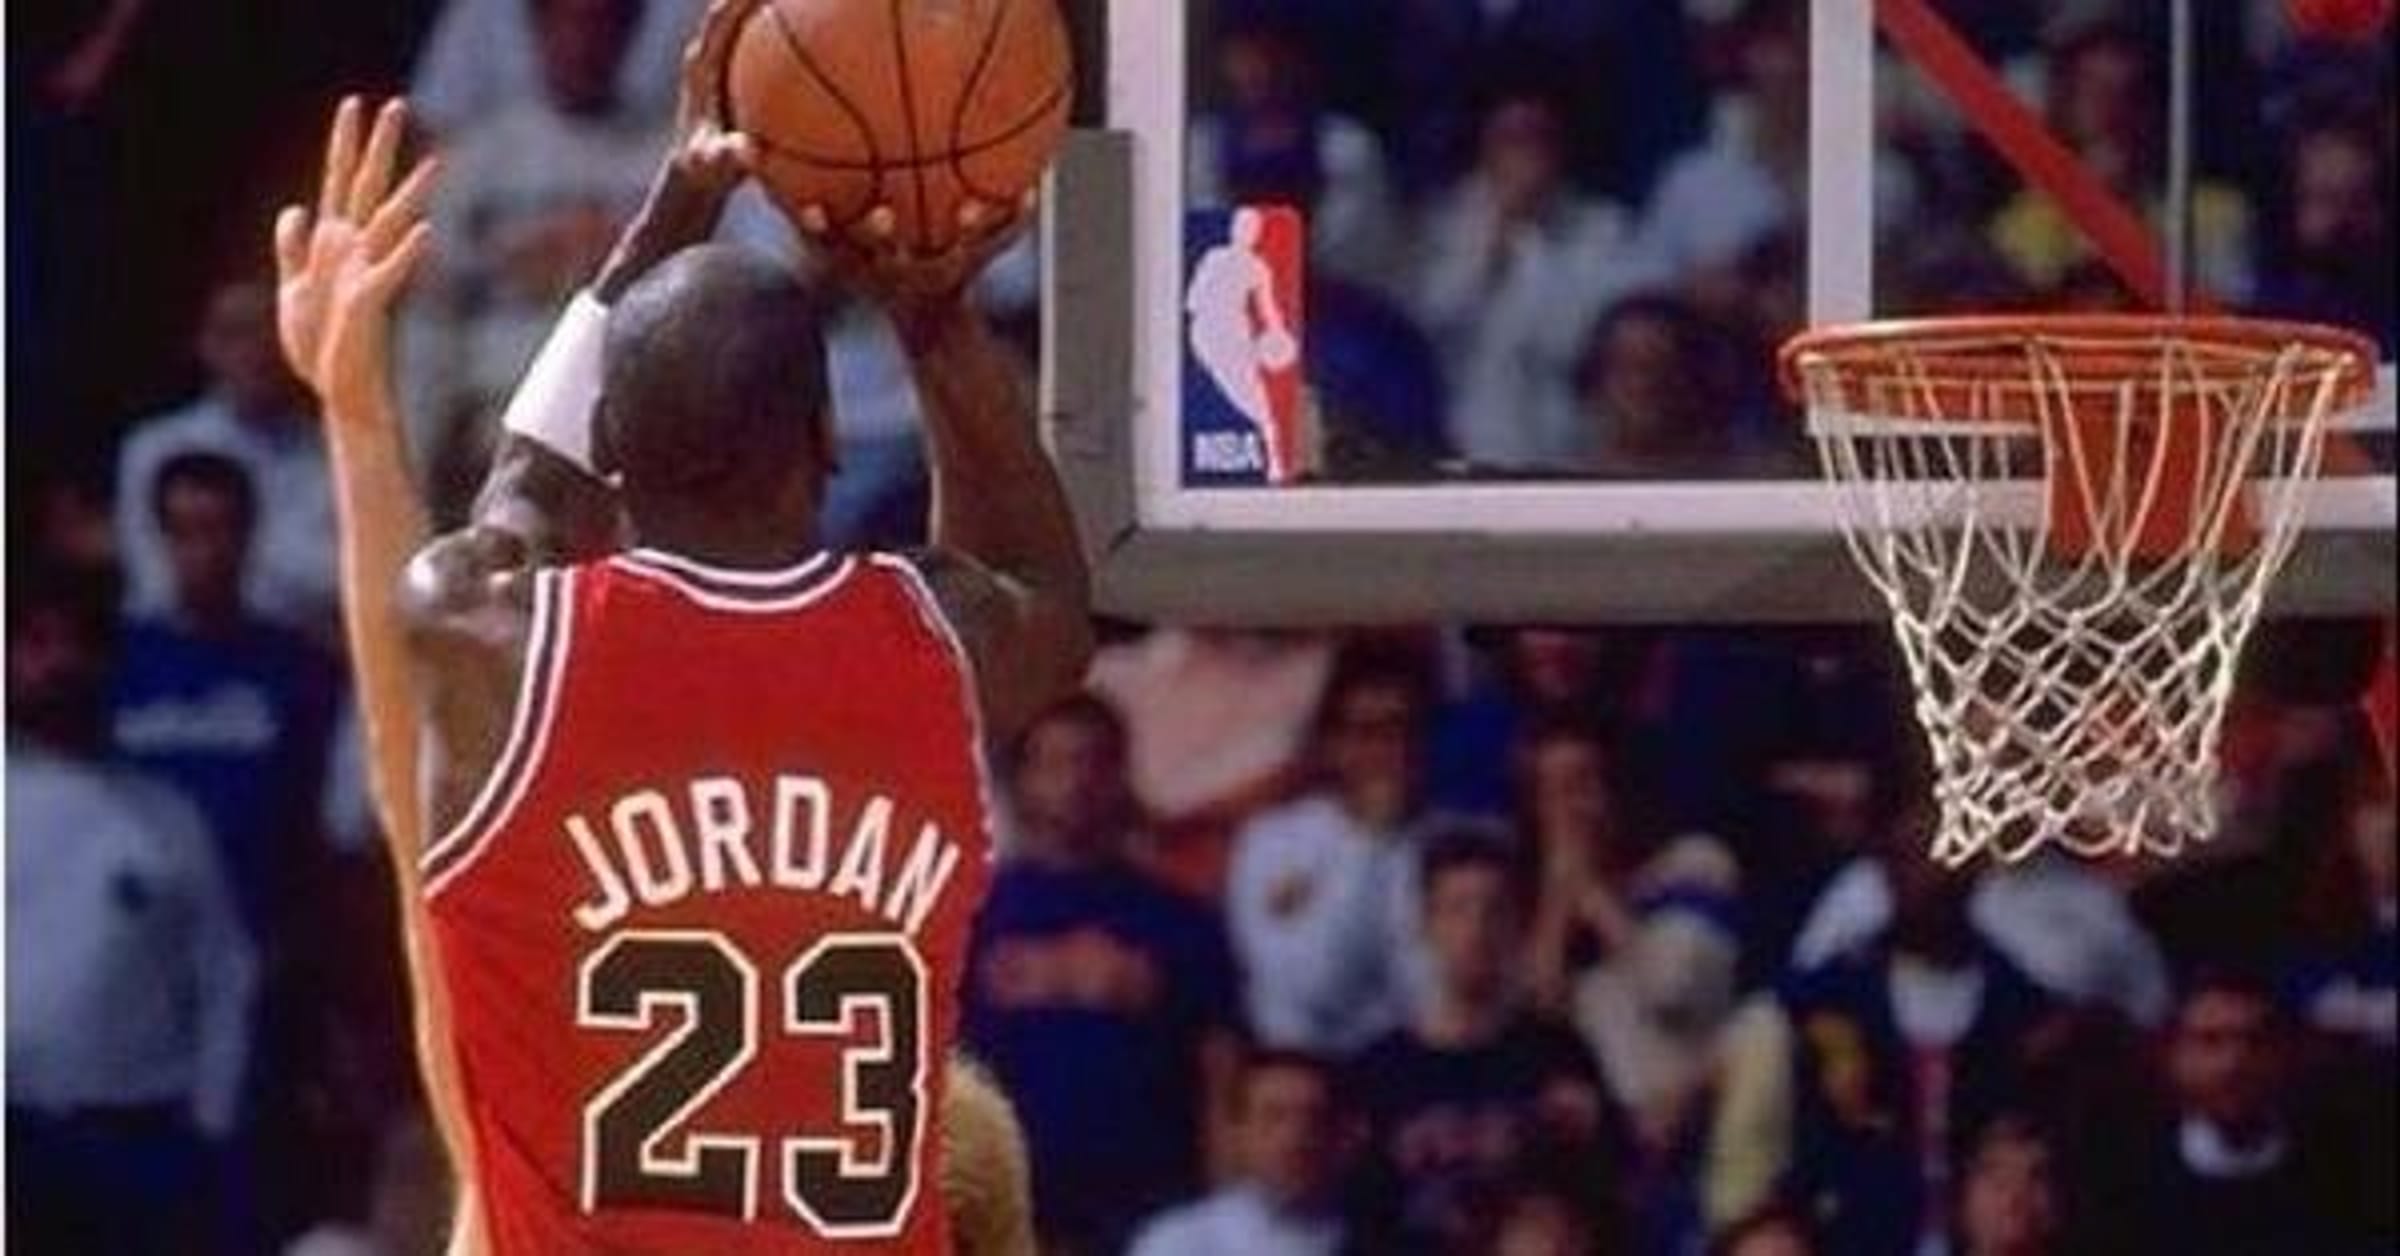 Top 10 Players With The Most Game-Winning Buzzer-Beaters In NBA